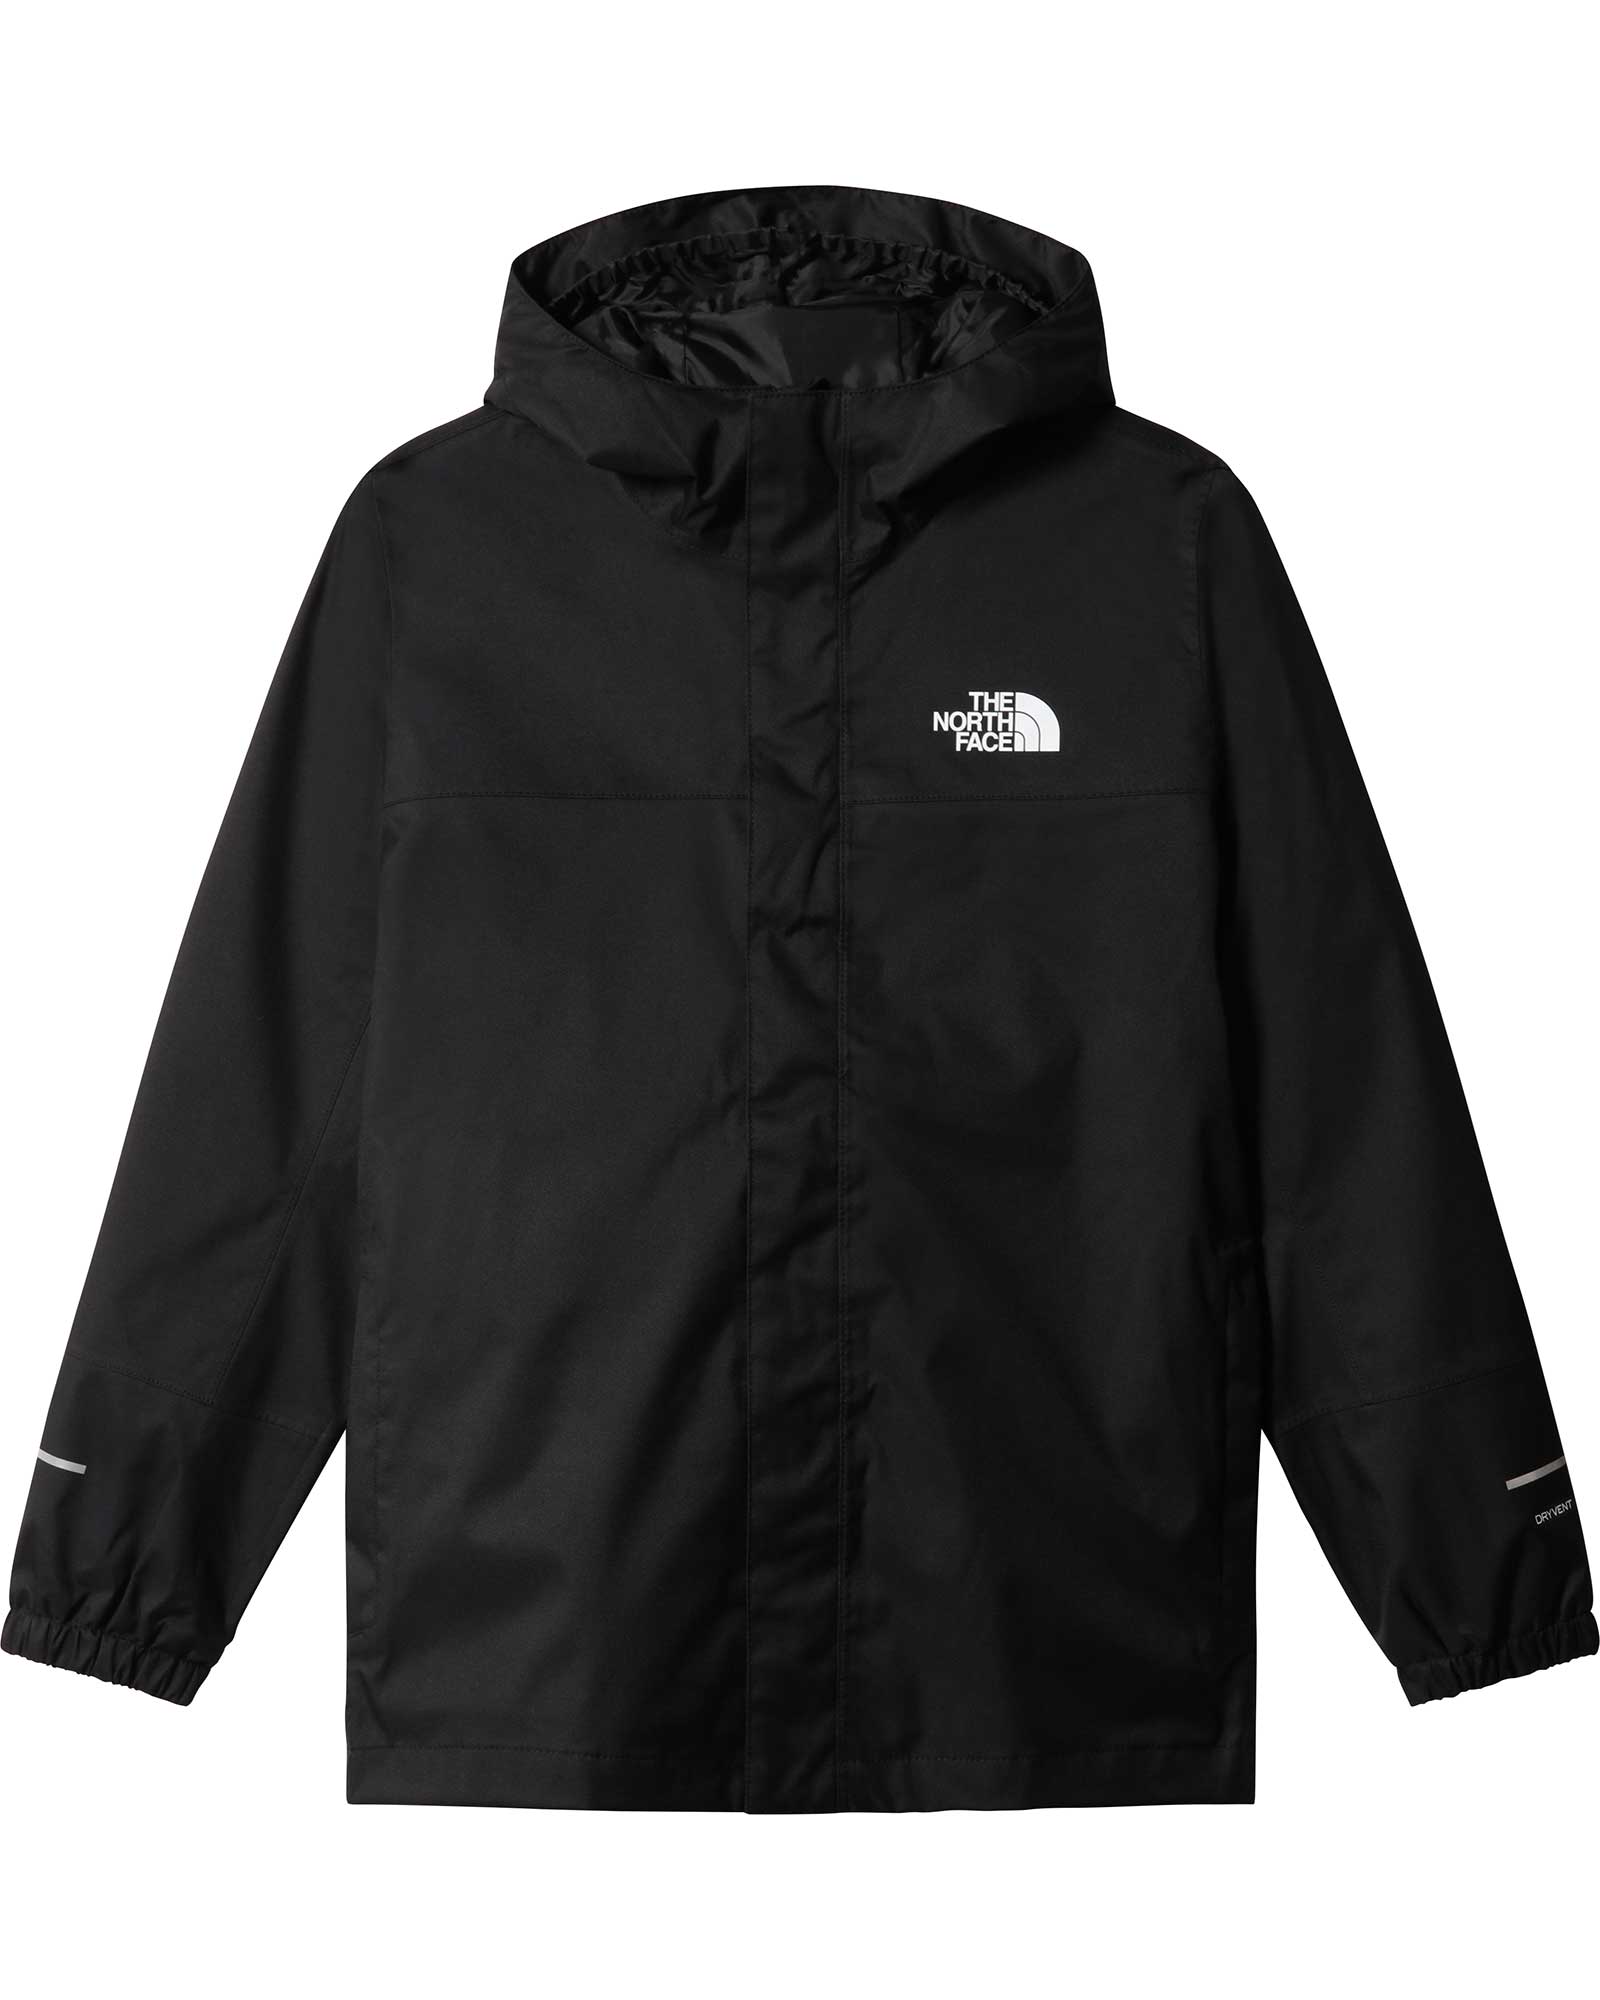 Product image of The North Face Antora Boys' Rain Jacket